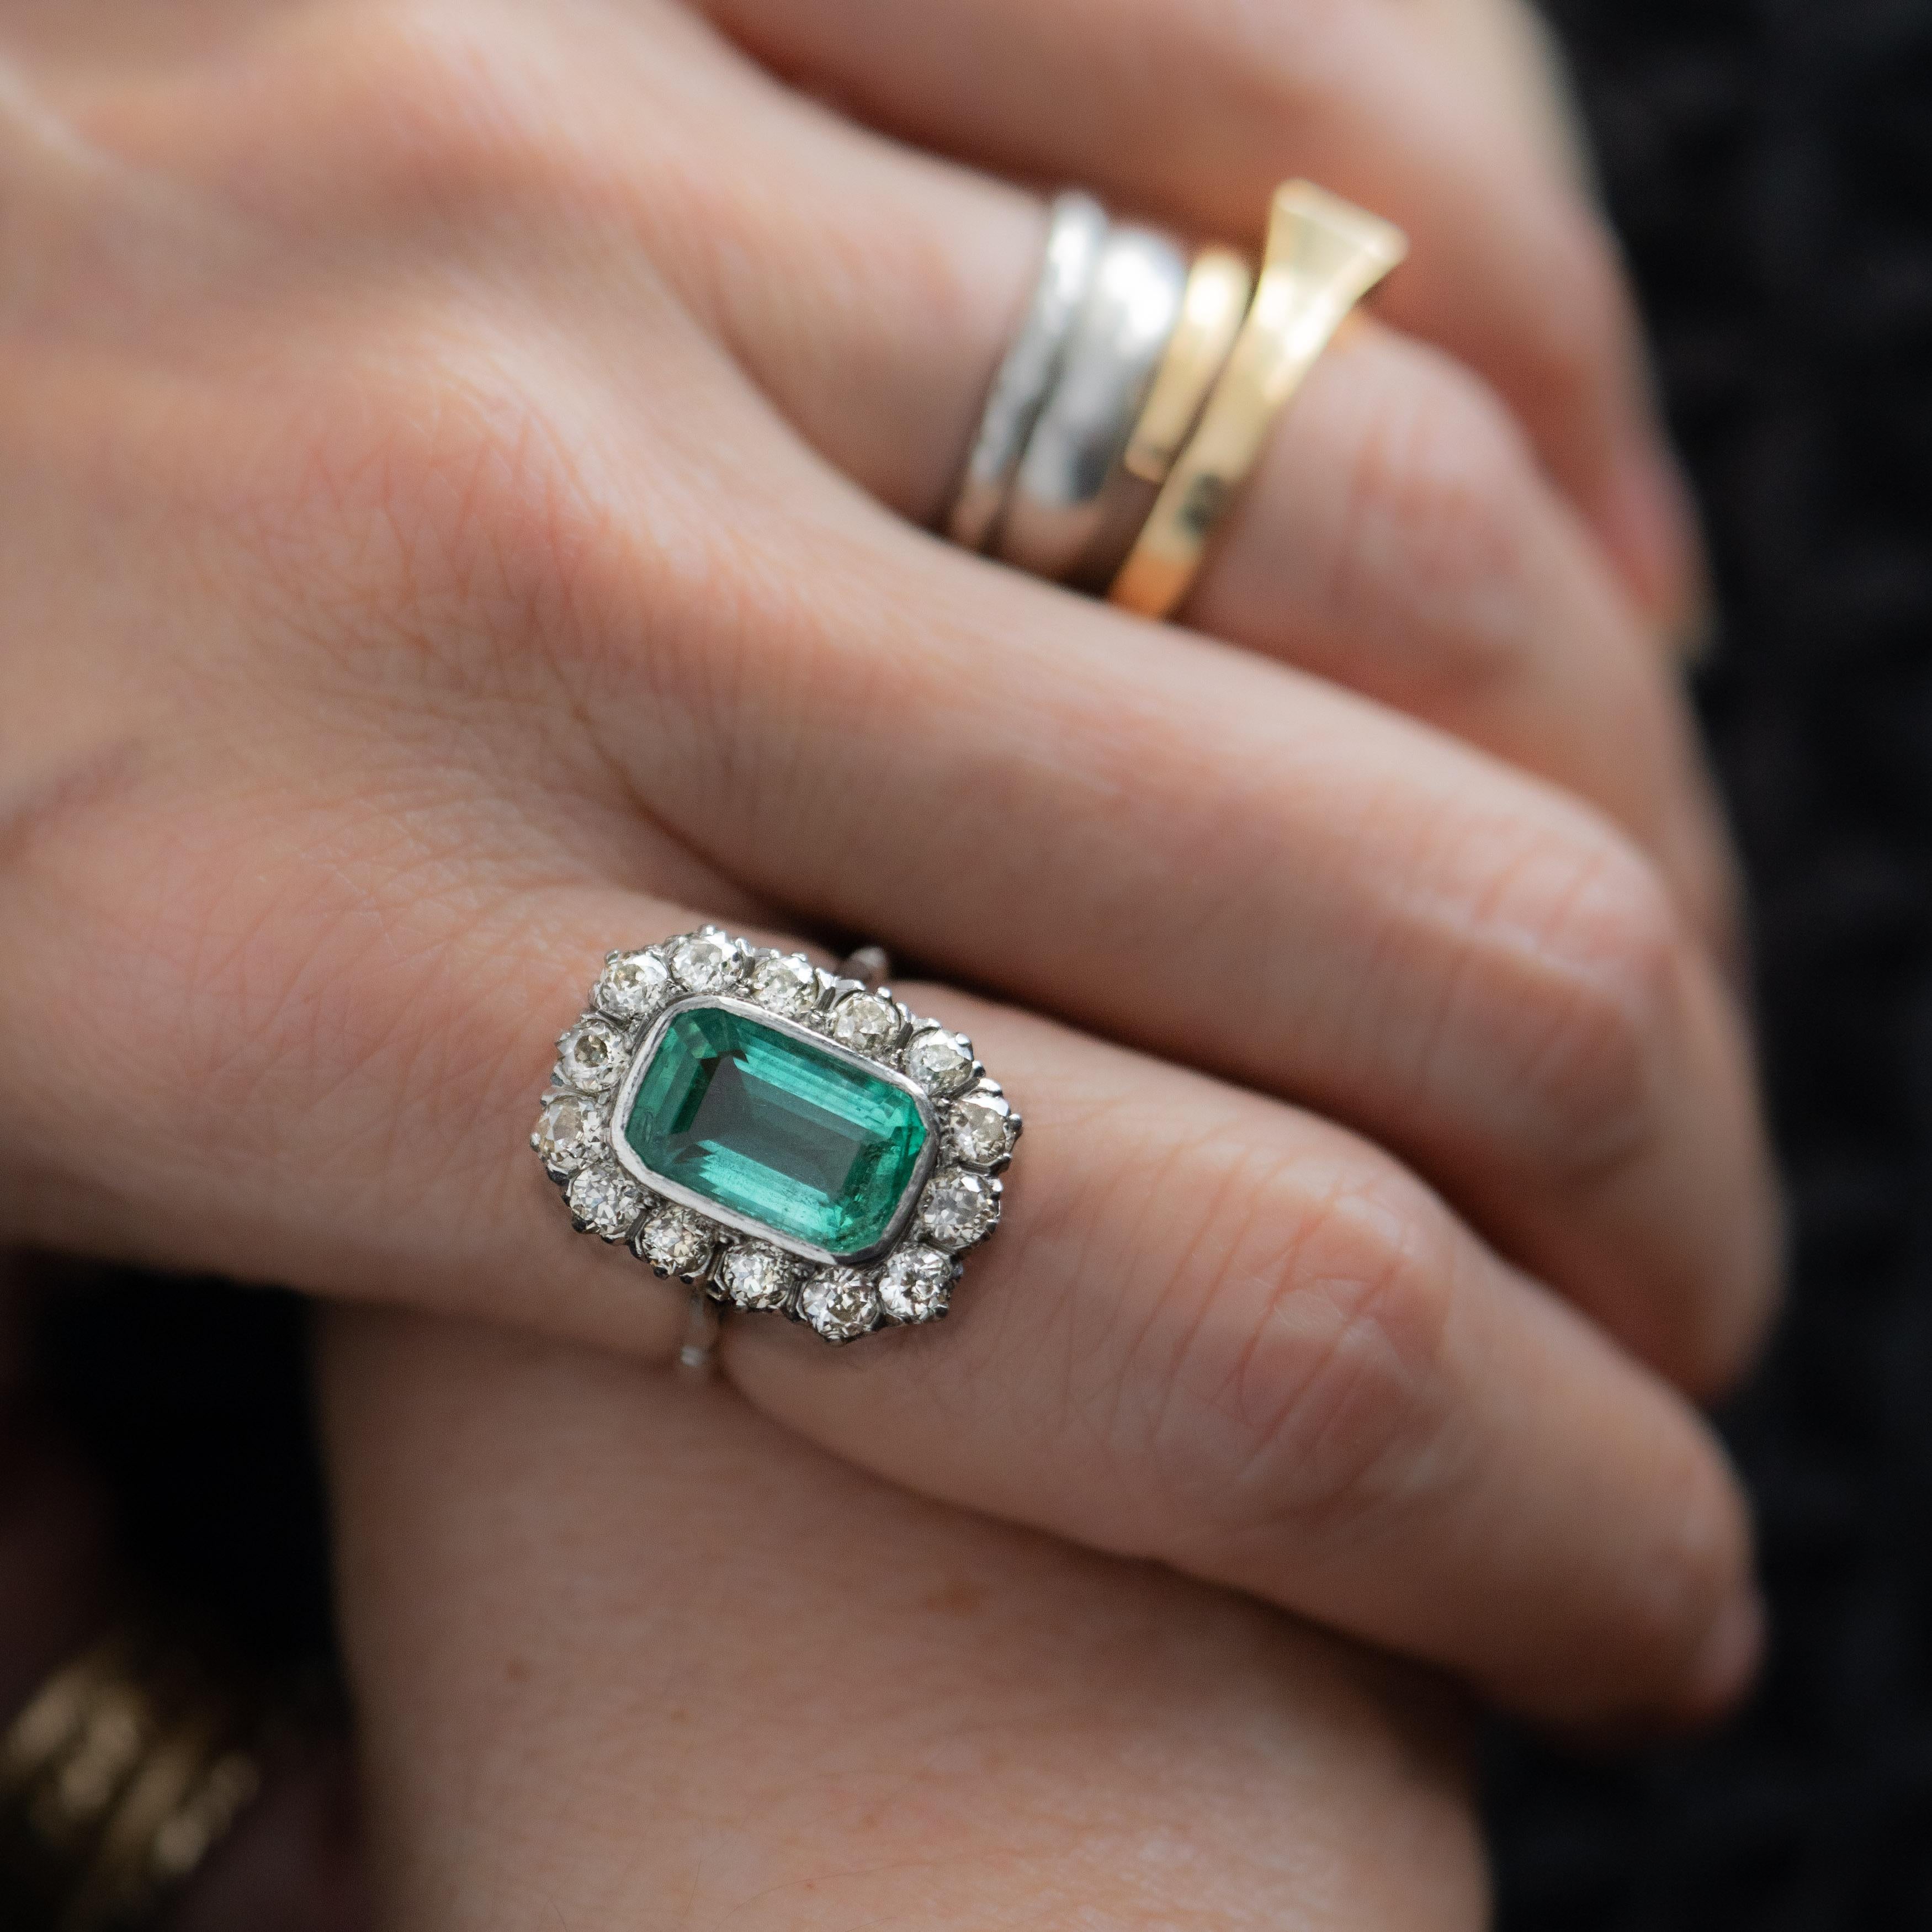 Edwardian Platinum and 4.5 Carat Colombian Emerald Ring and Diamond Ring For Sale 1